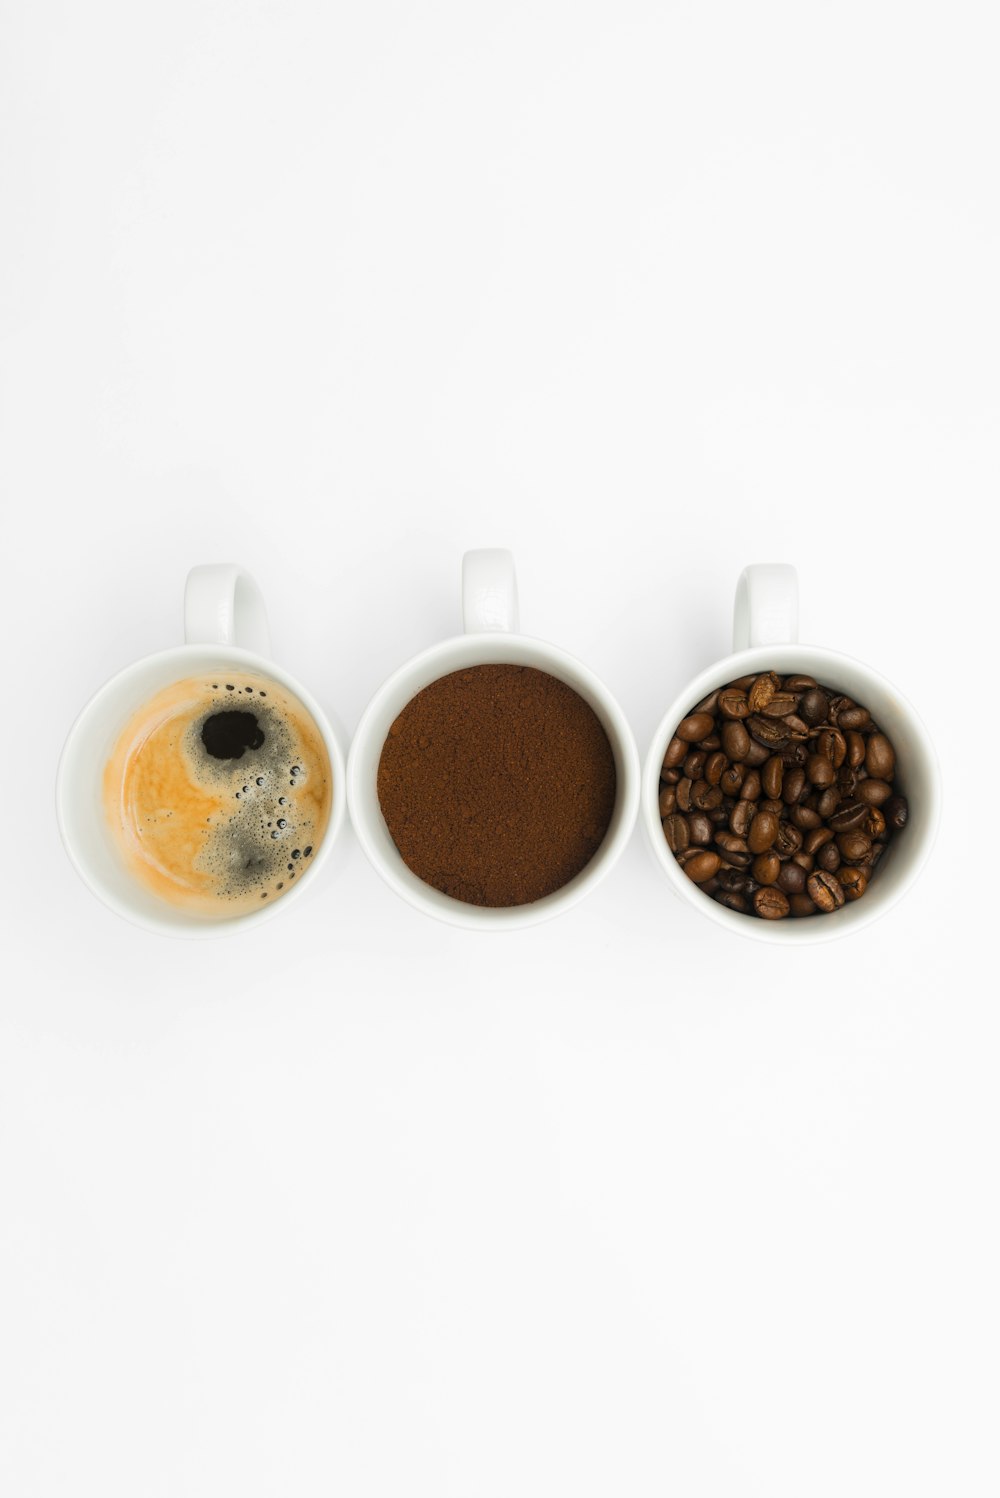 three coffee mugs filled with different types of coffee